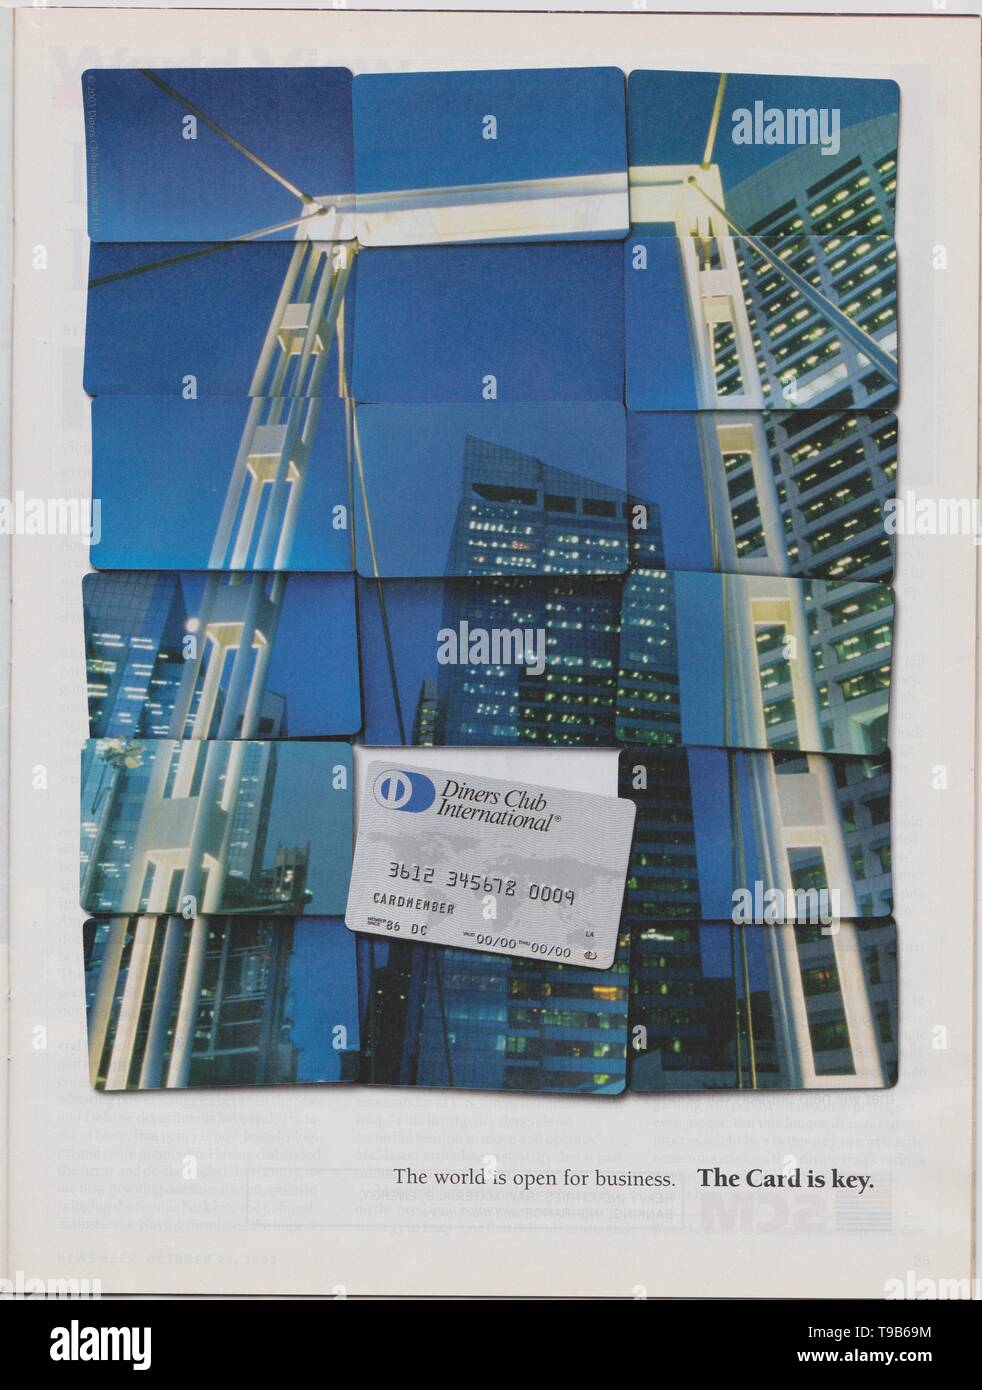 poster advertising Diners Club International in magazine from 2005, World is open for business. The Card is Key slogan Stock Photo